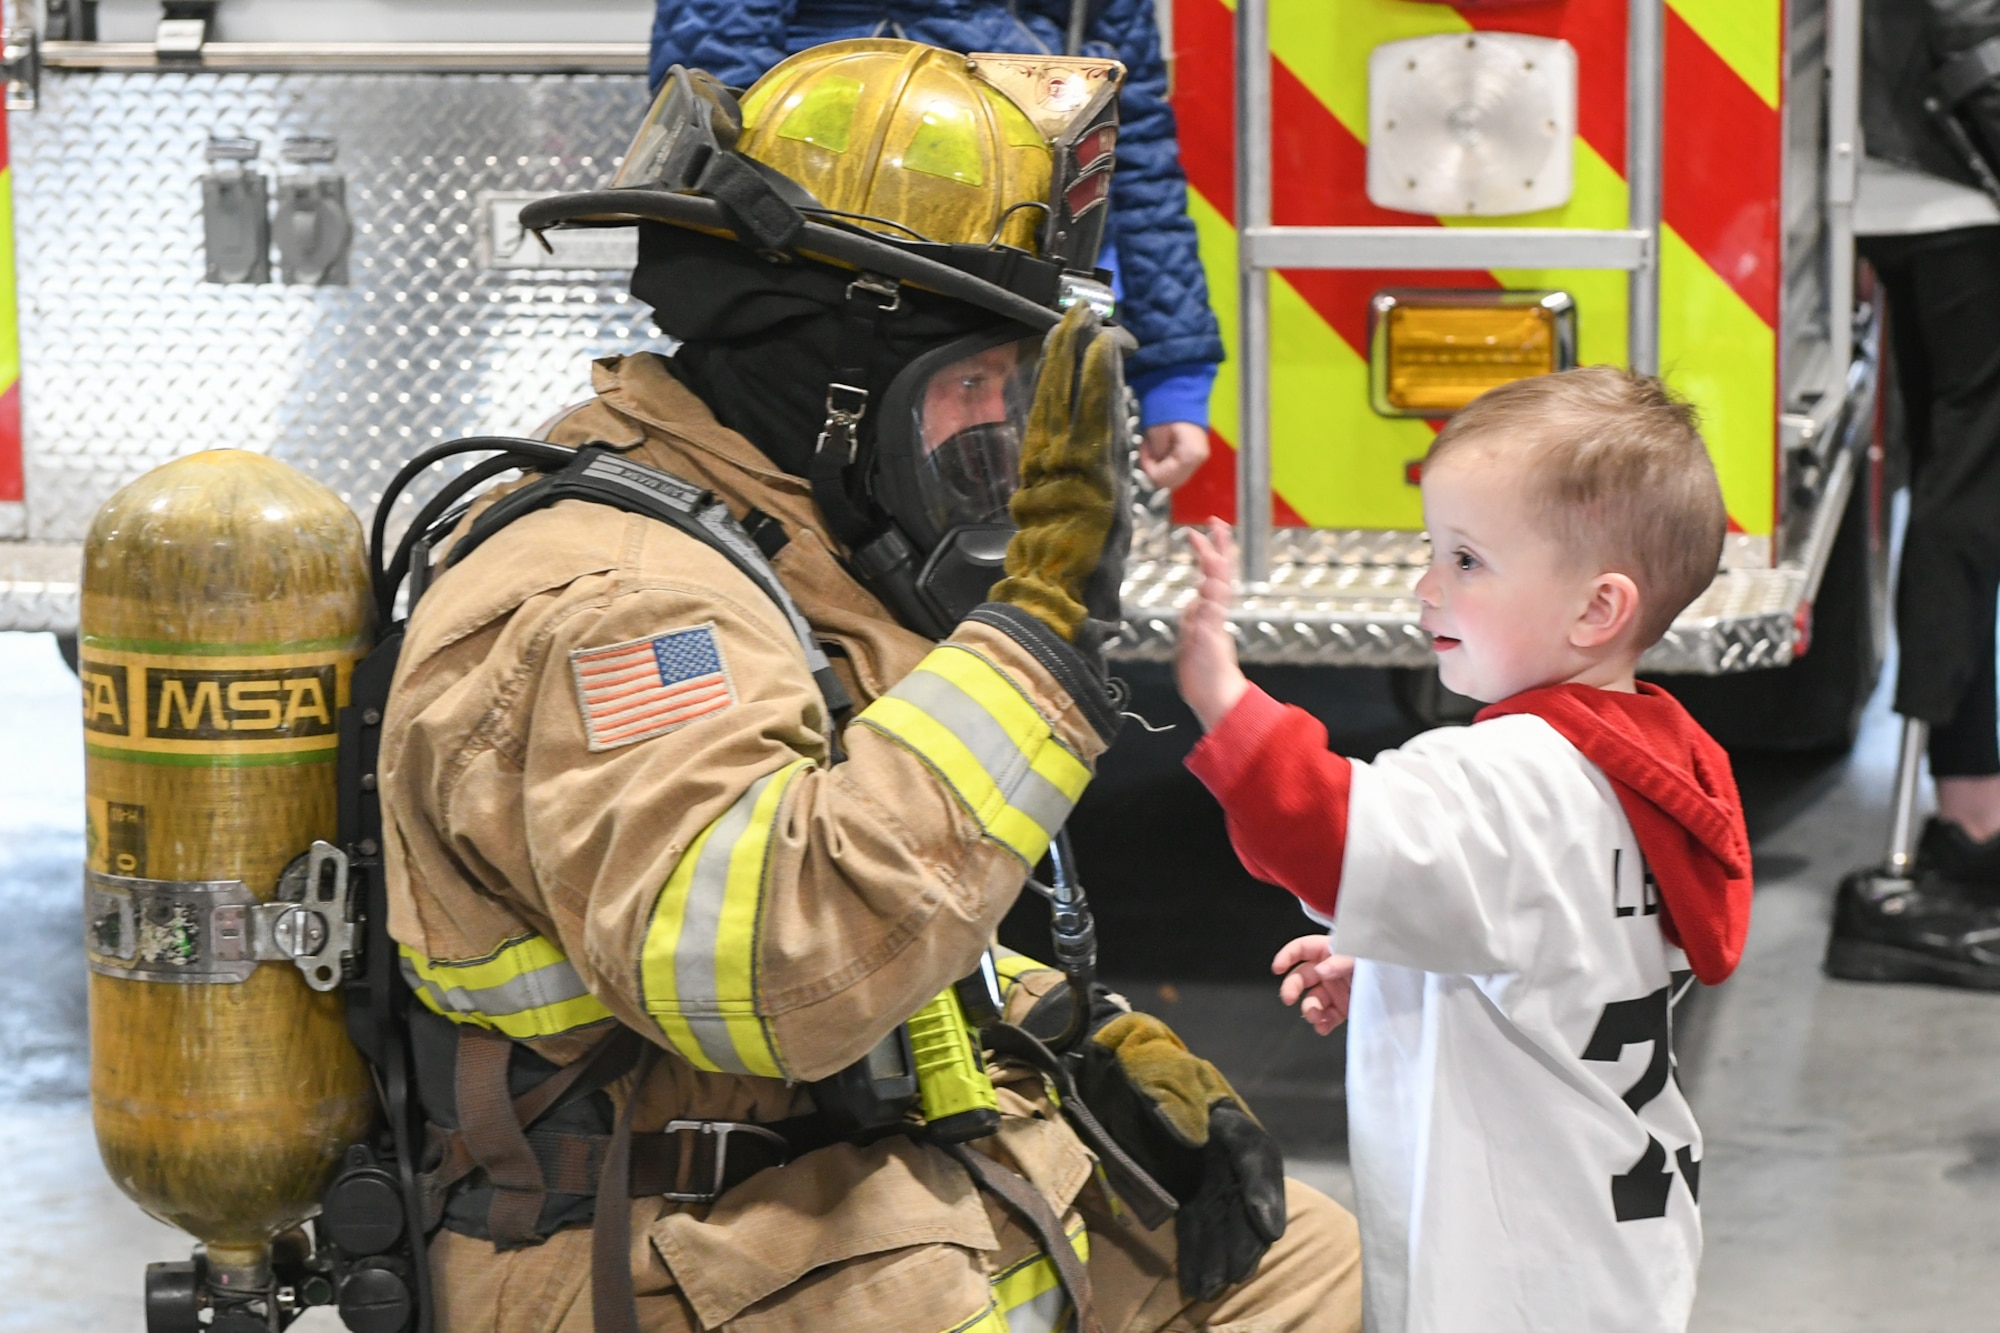 Clark Lenehan high-fives Duncan Hutchinson, a firefighter with 775th Civil Engineering Squadron, during a visit to the fire department Oct. 11, 2018, at Hill Air Force Base, Utah. The visit was part of a 75th Air Base Wing-hosted base tour for Make-A-Wish Utah children and their families. (U.S. Air Force photo by Cynthia Griggs)